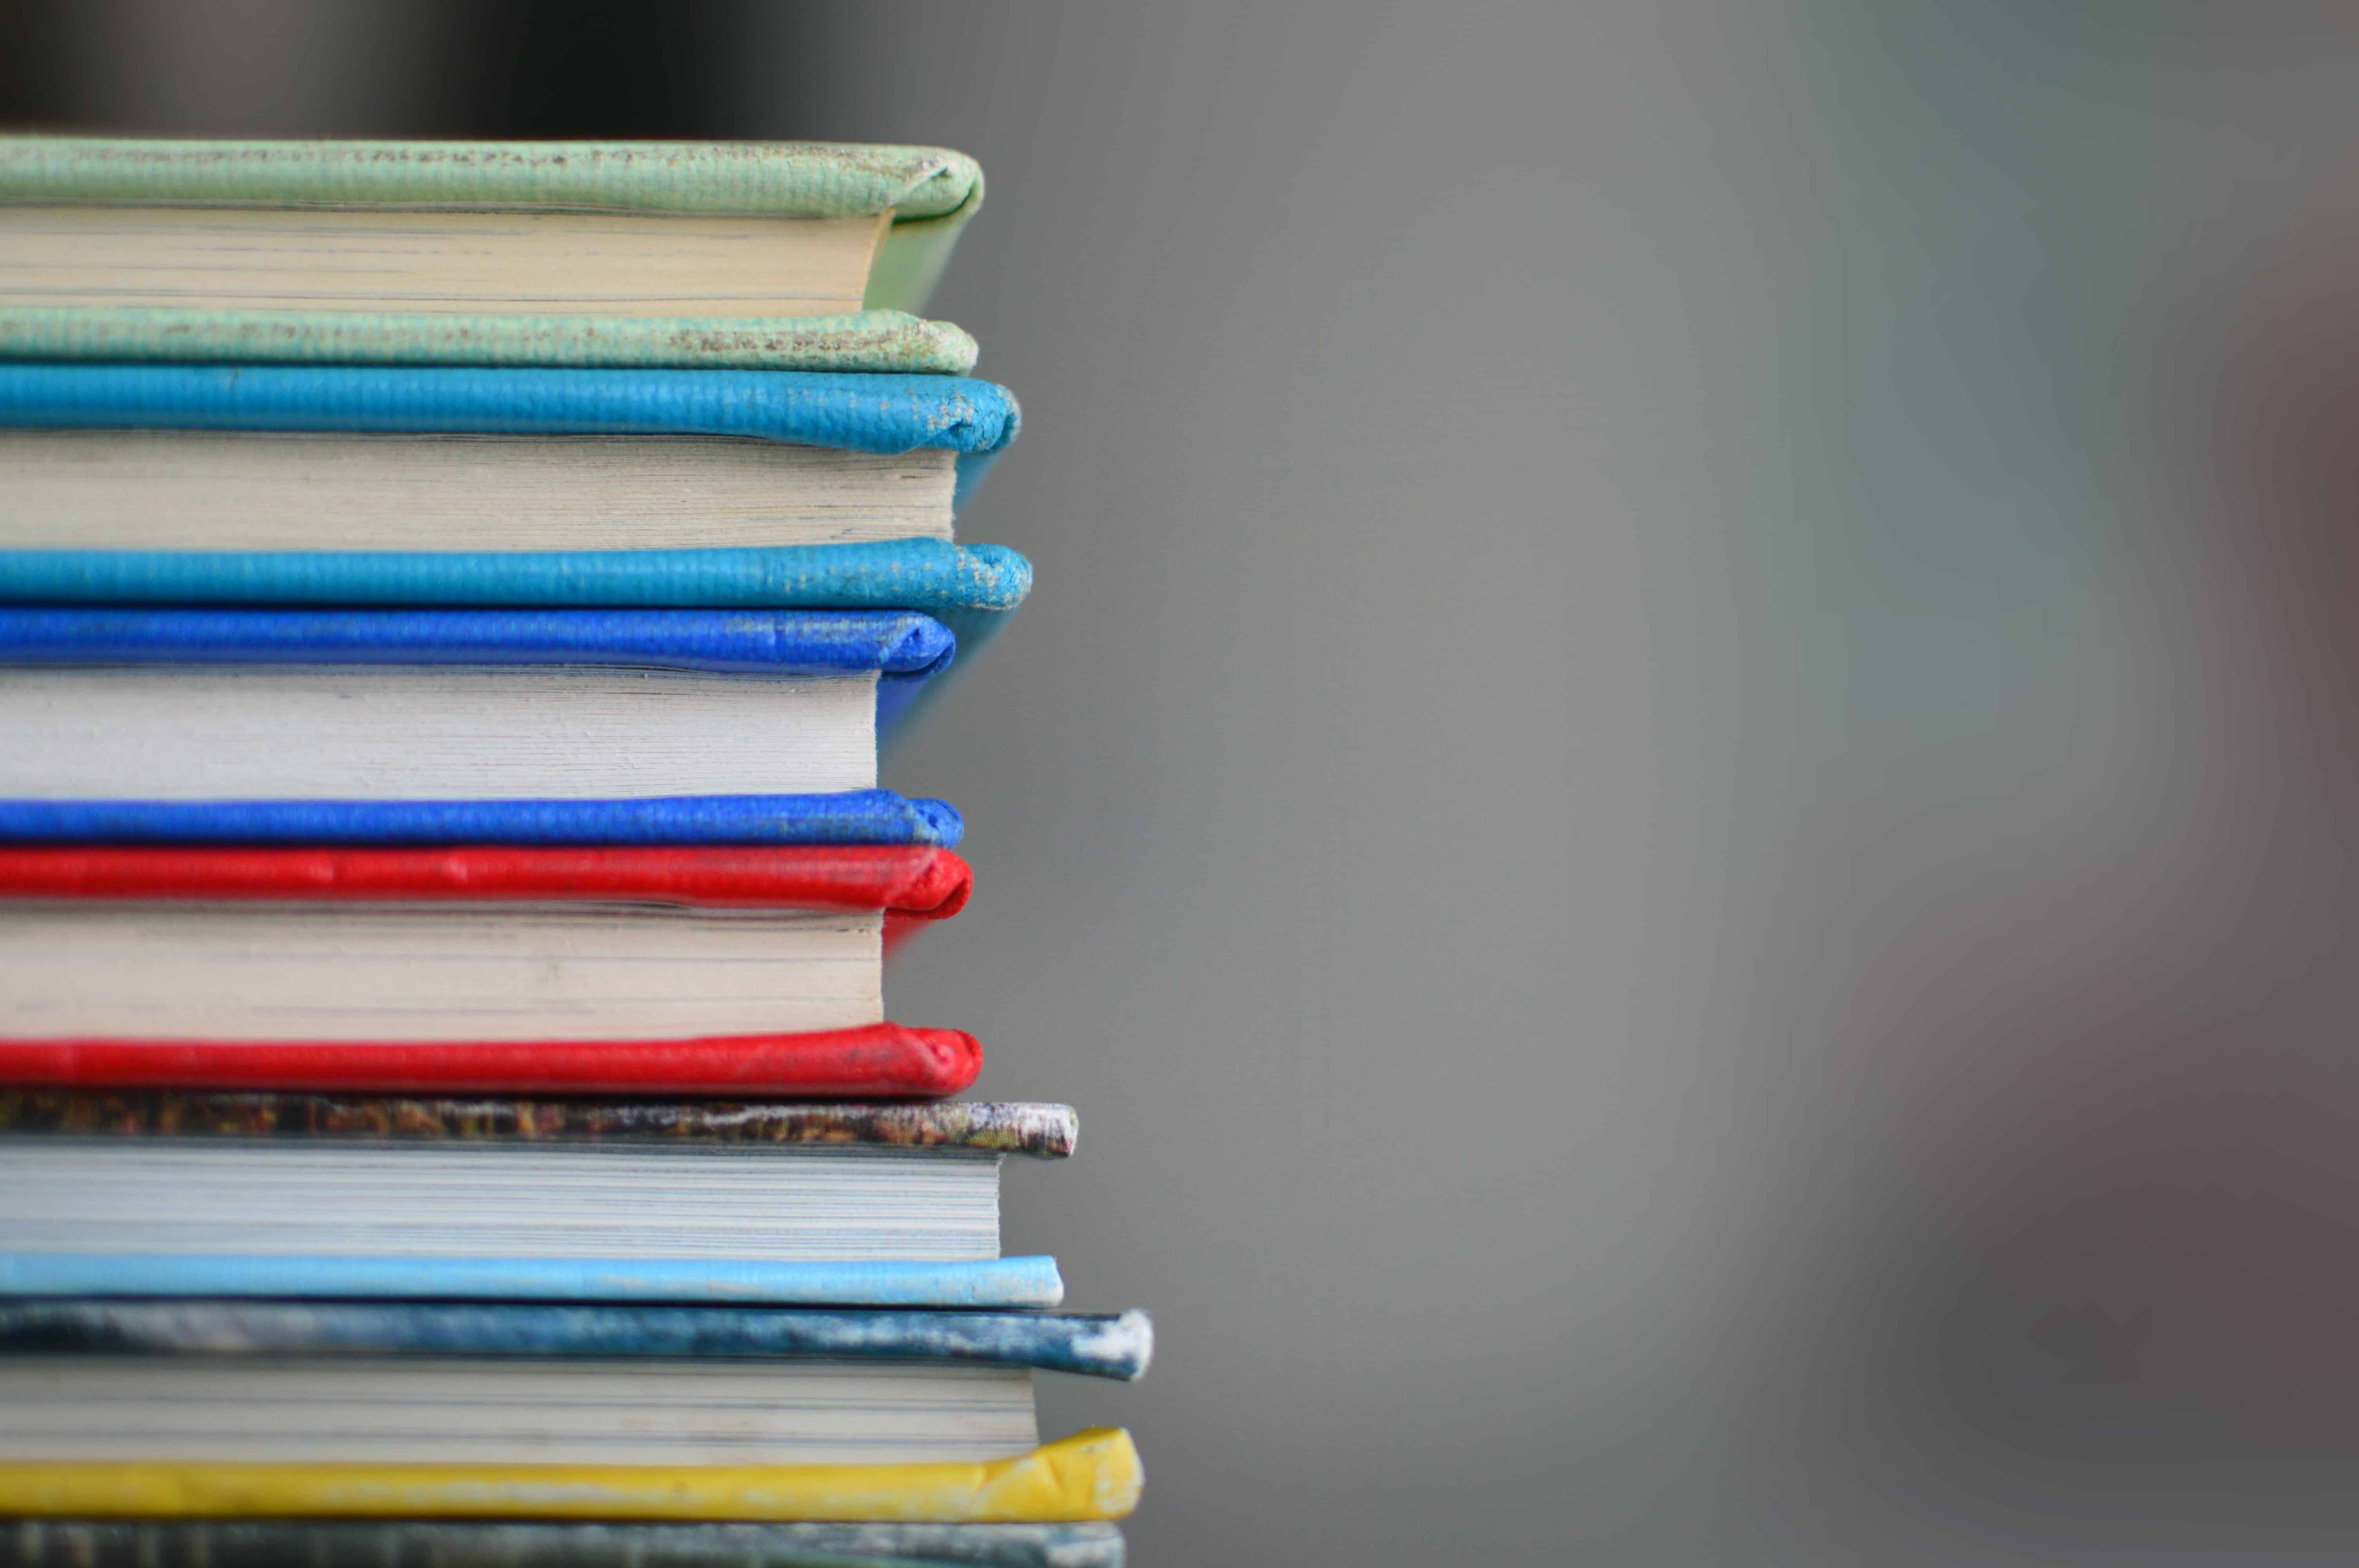 A stack of used books each bound in different colors.